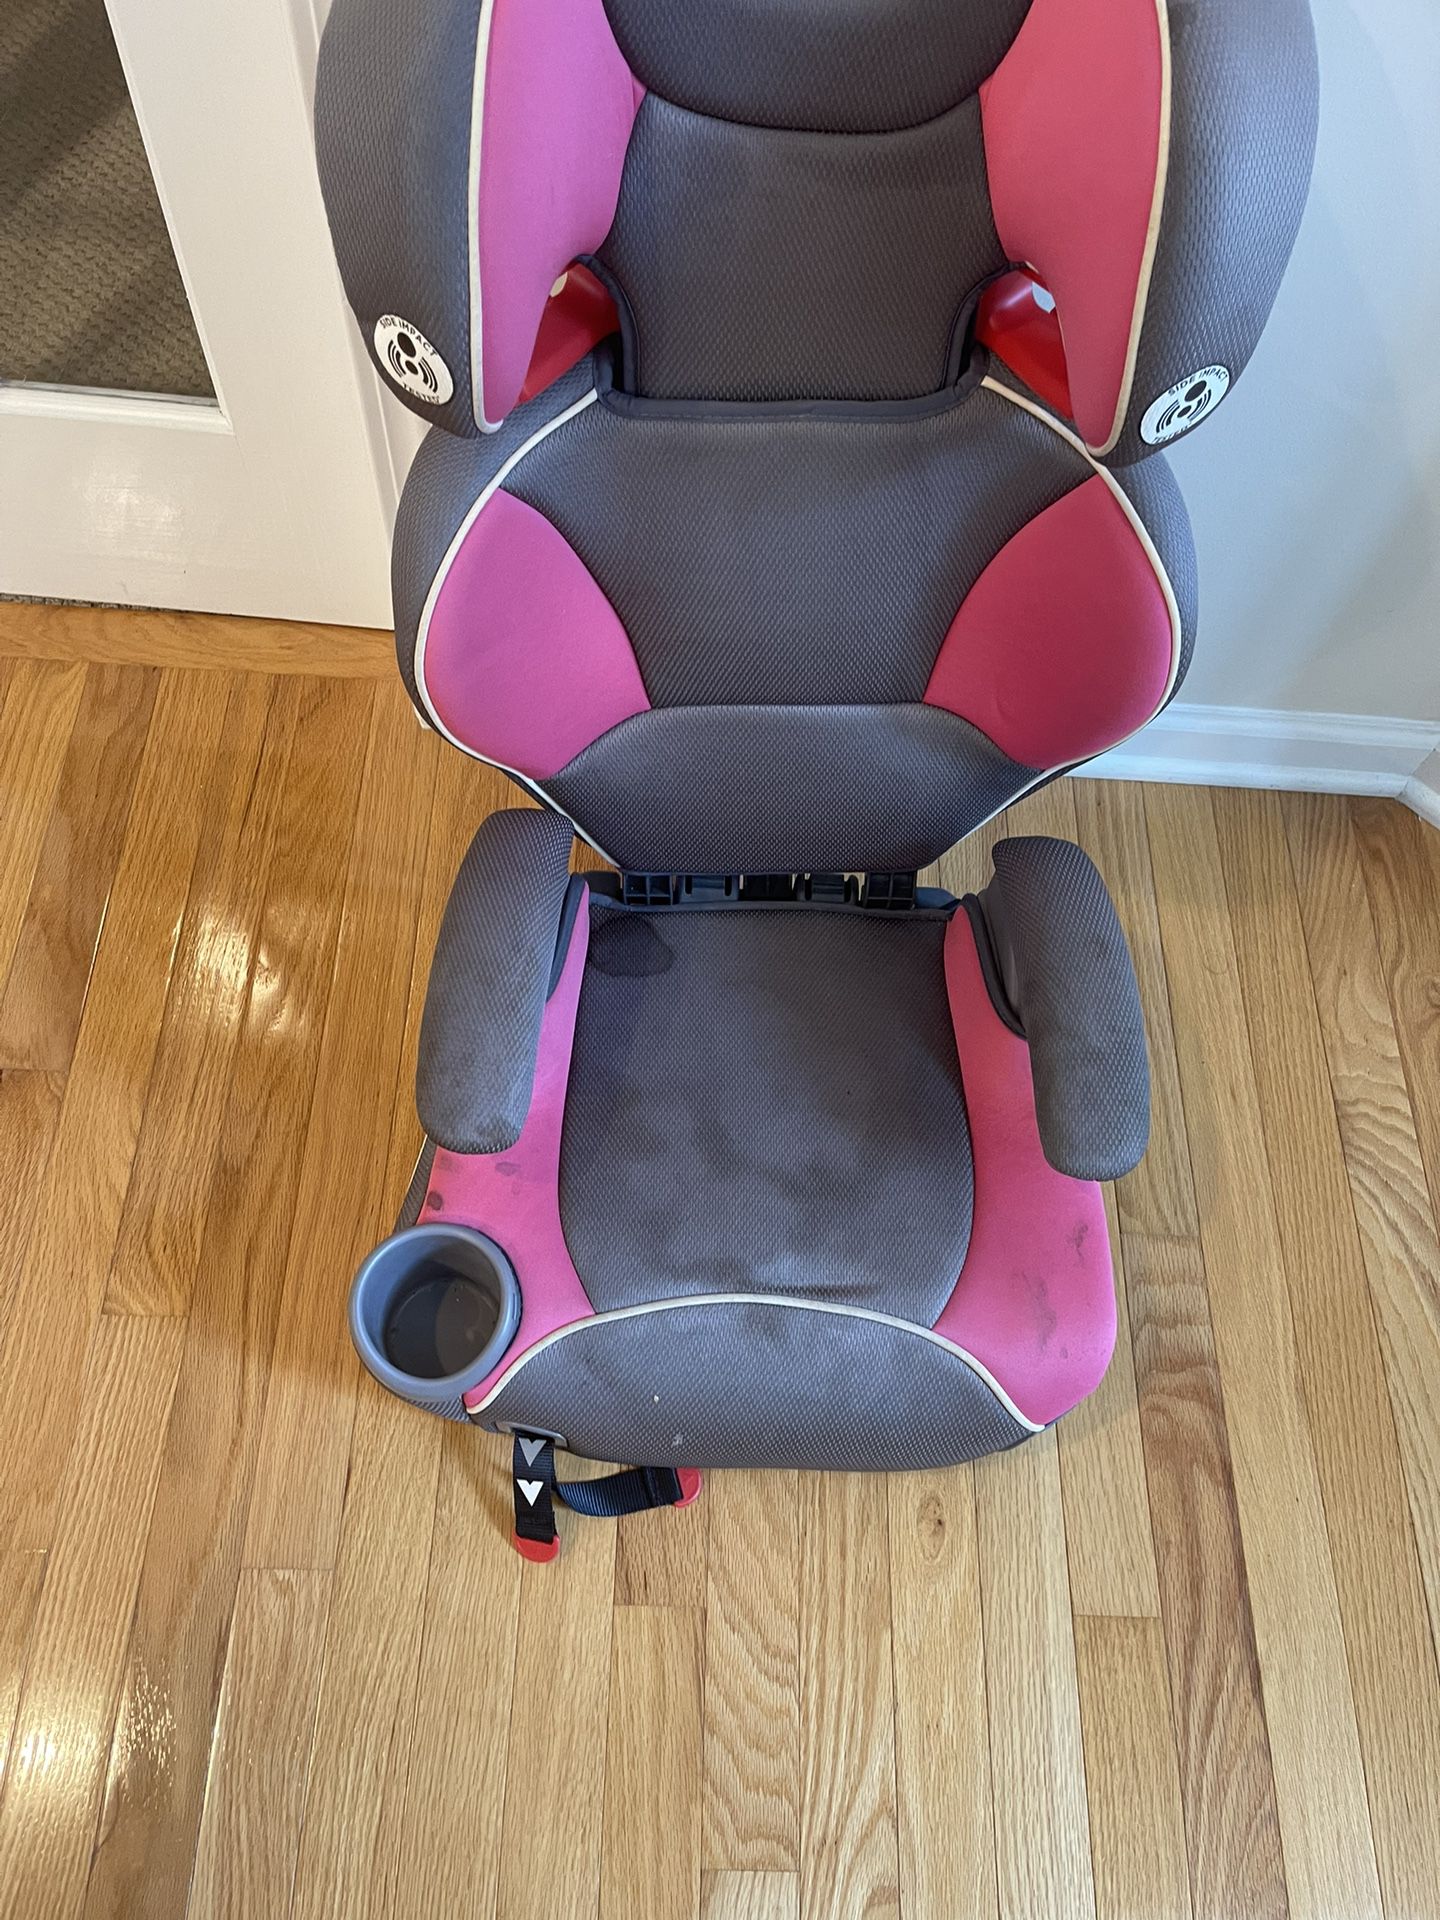 GRACO Child Booster Seat Detachable Back 